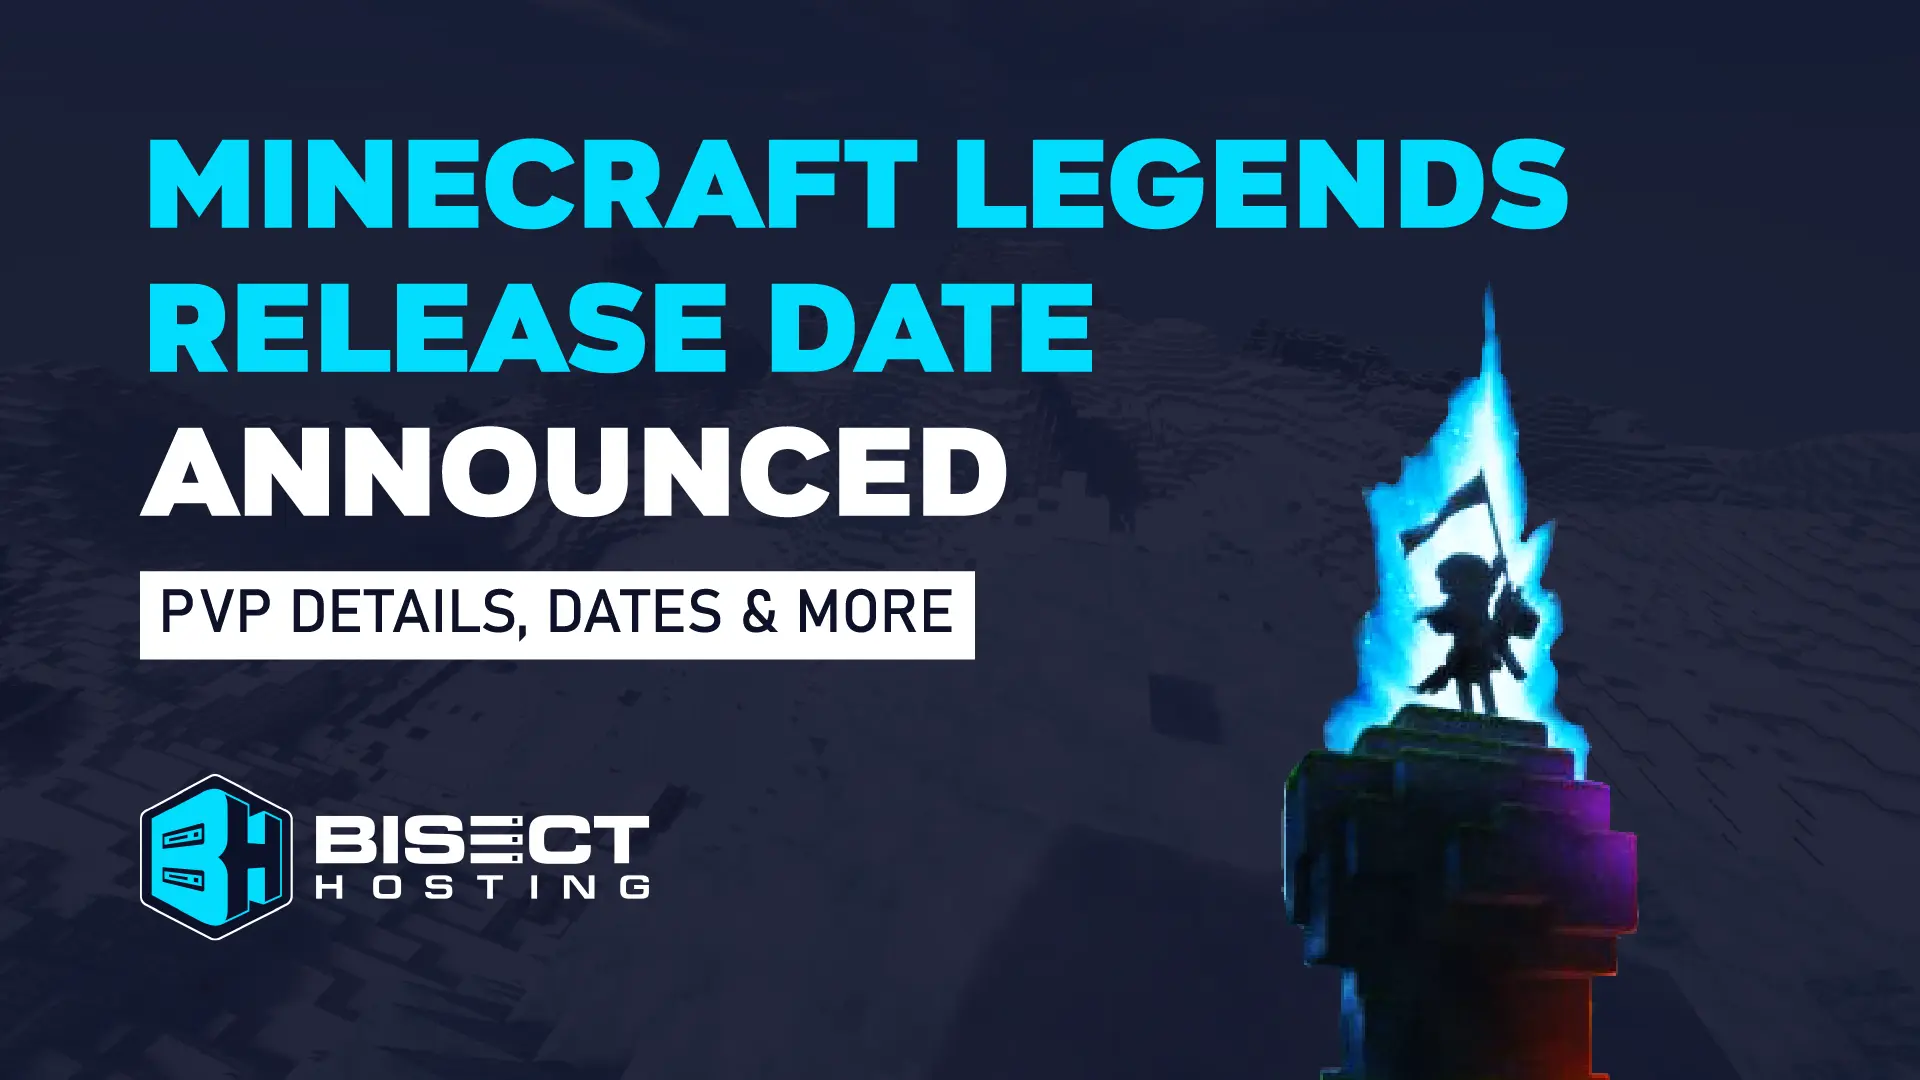 Minecraft Legends Release Date Announced – PVP Details, Dates, & More